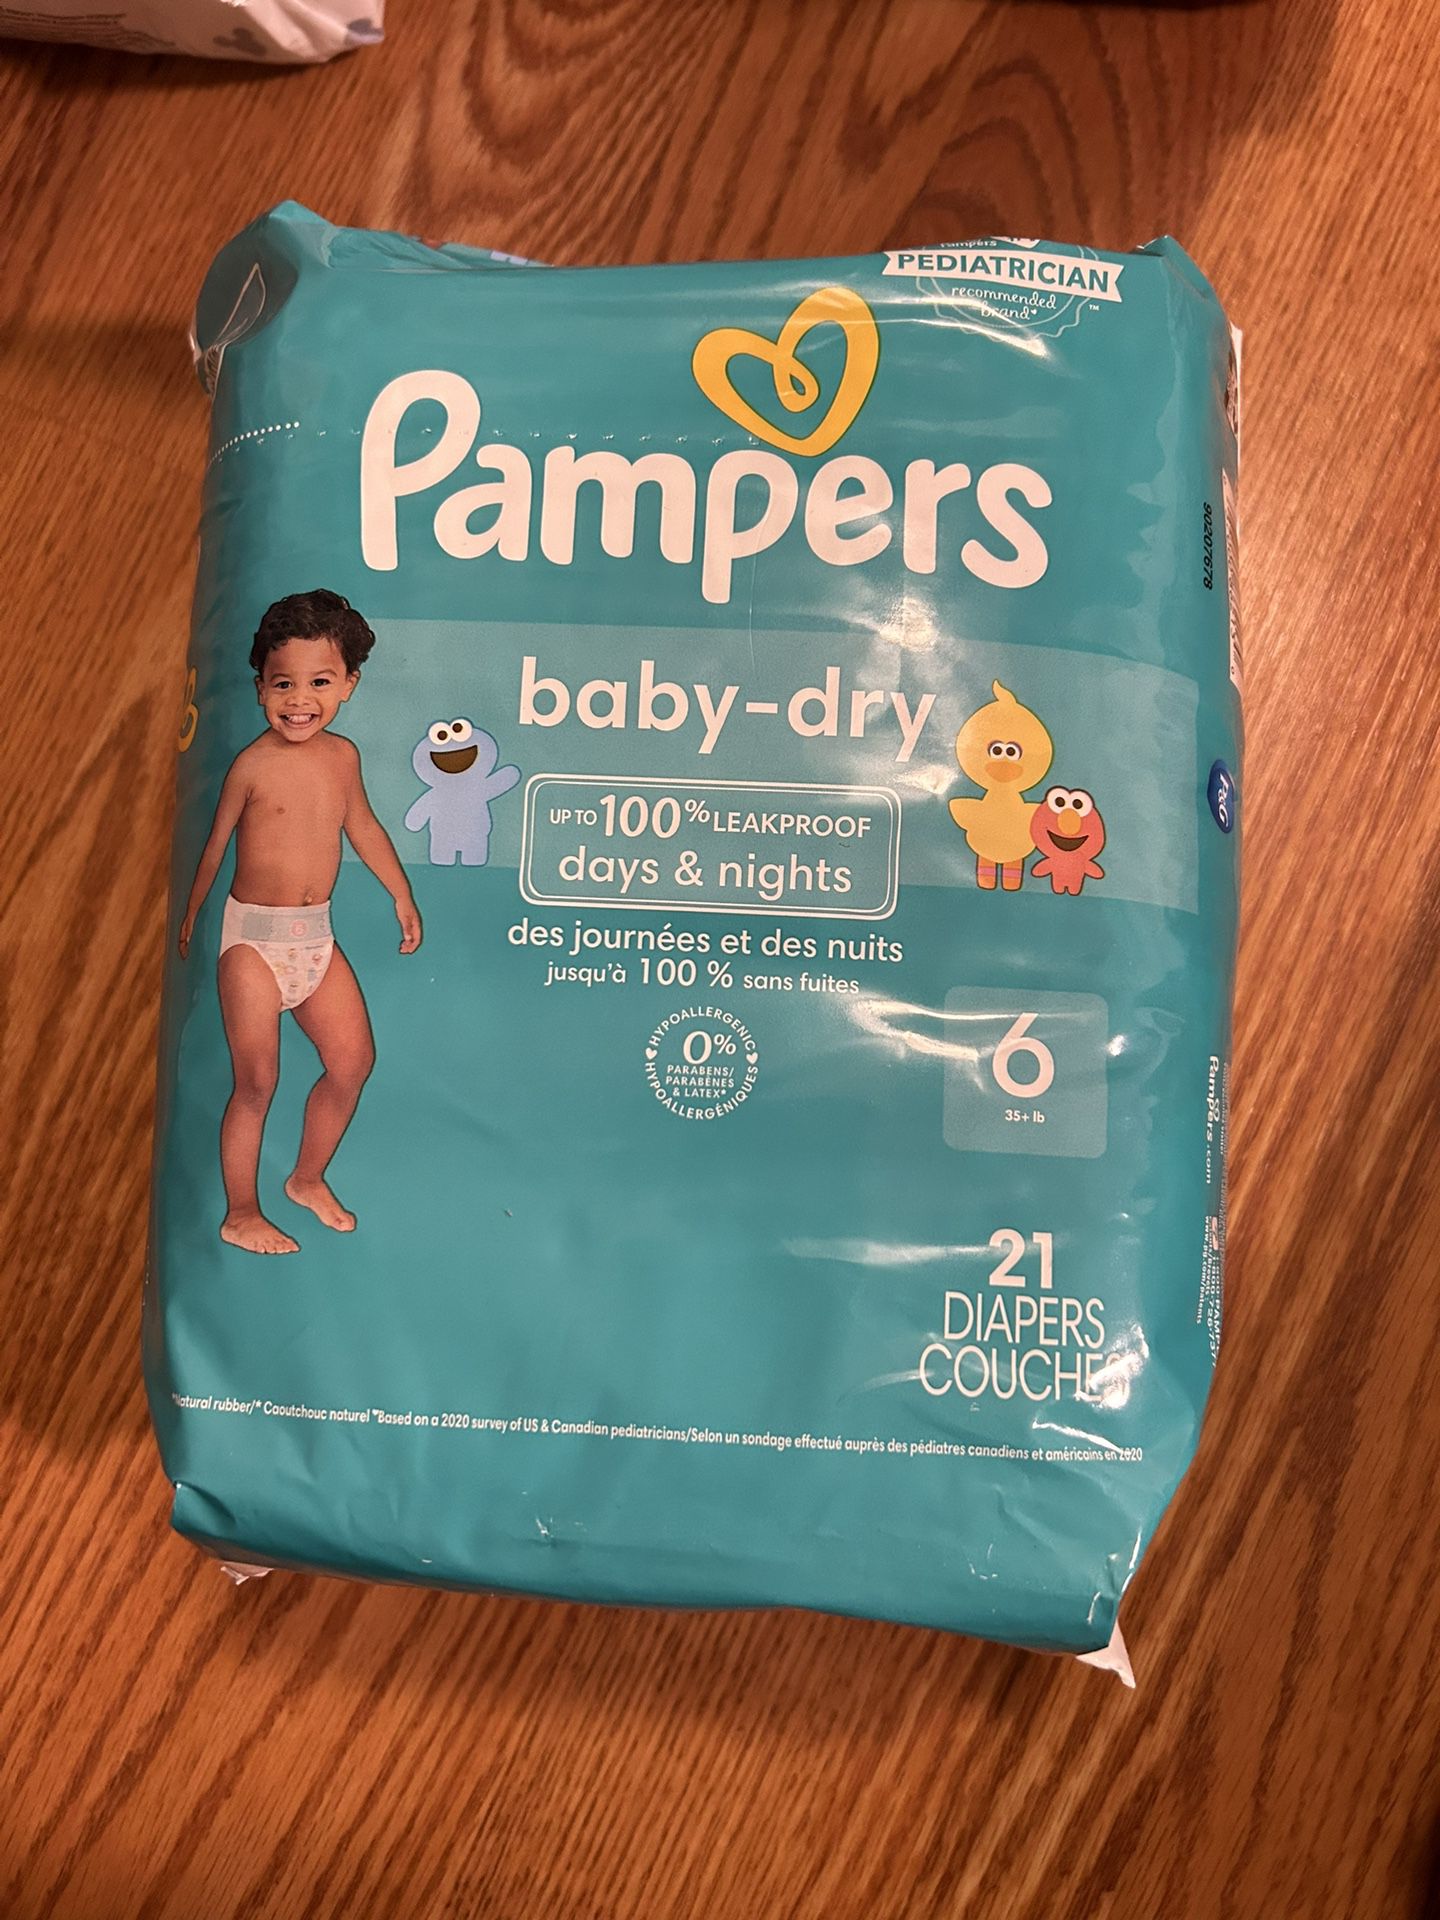 Pampers Size 6 21 Count